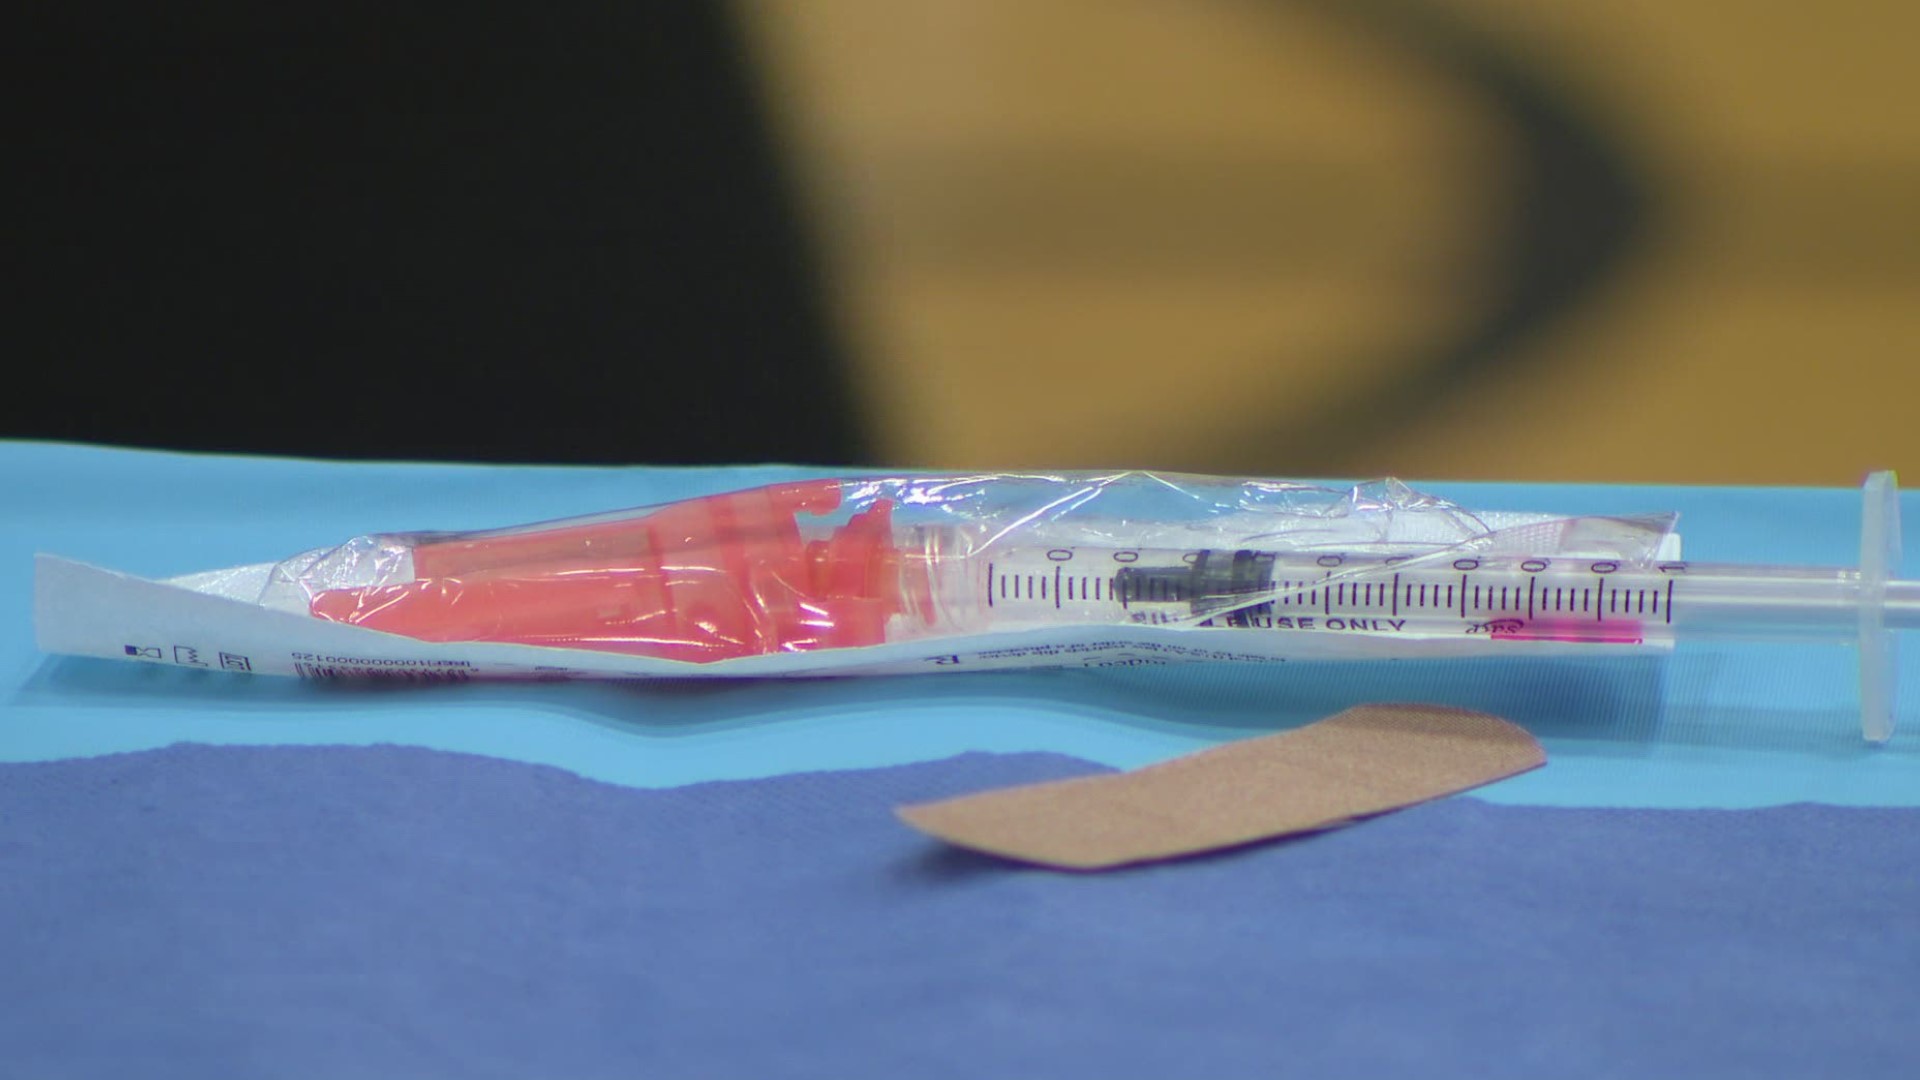 A pop-up vaccination clinic is scheduled for Sheridan High School to hopefully reach rural residents who want the vaccine.